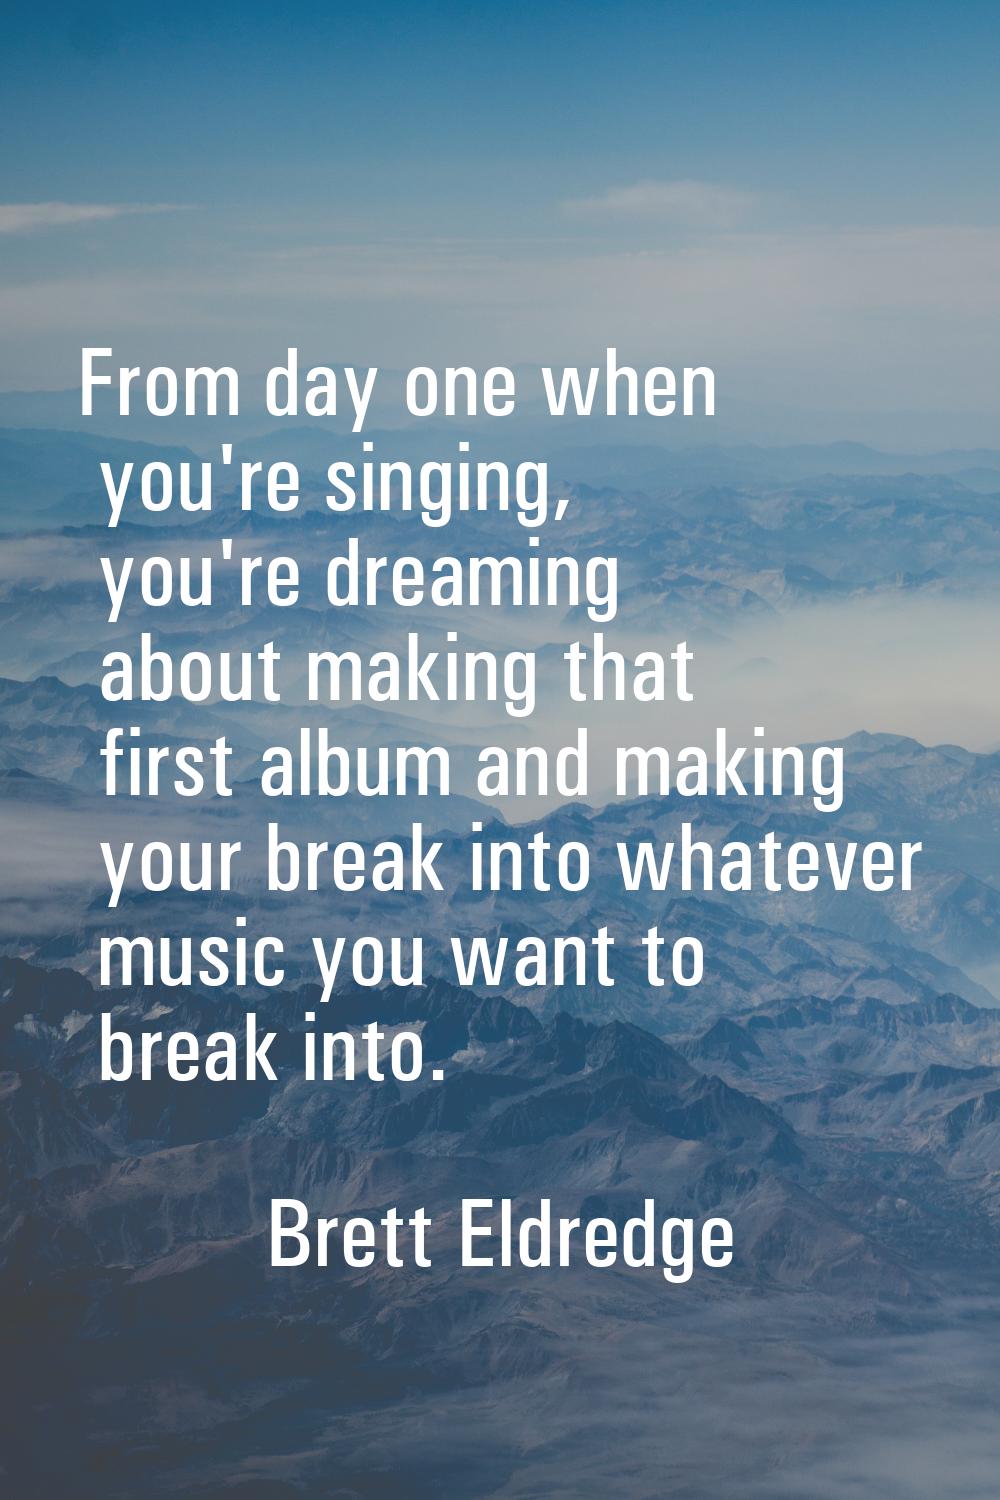 From day one when you're singing, you're dreaming about making that first album and making your bre